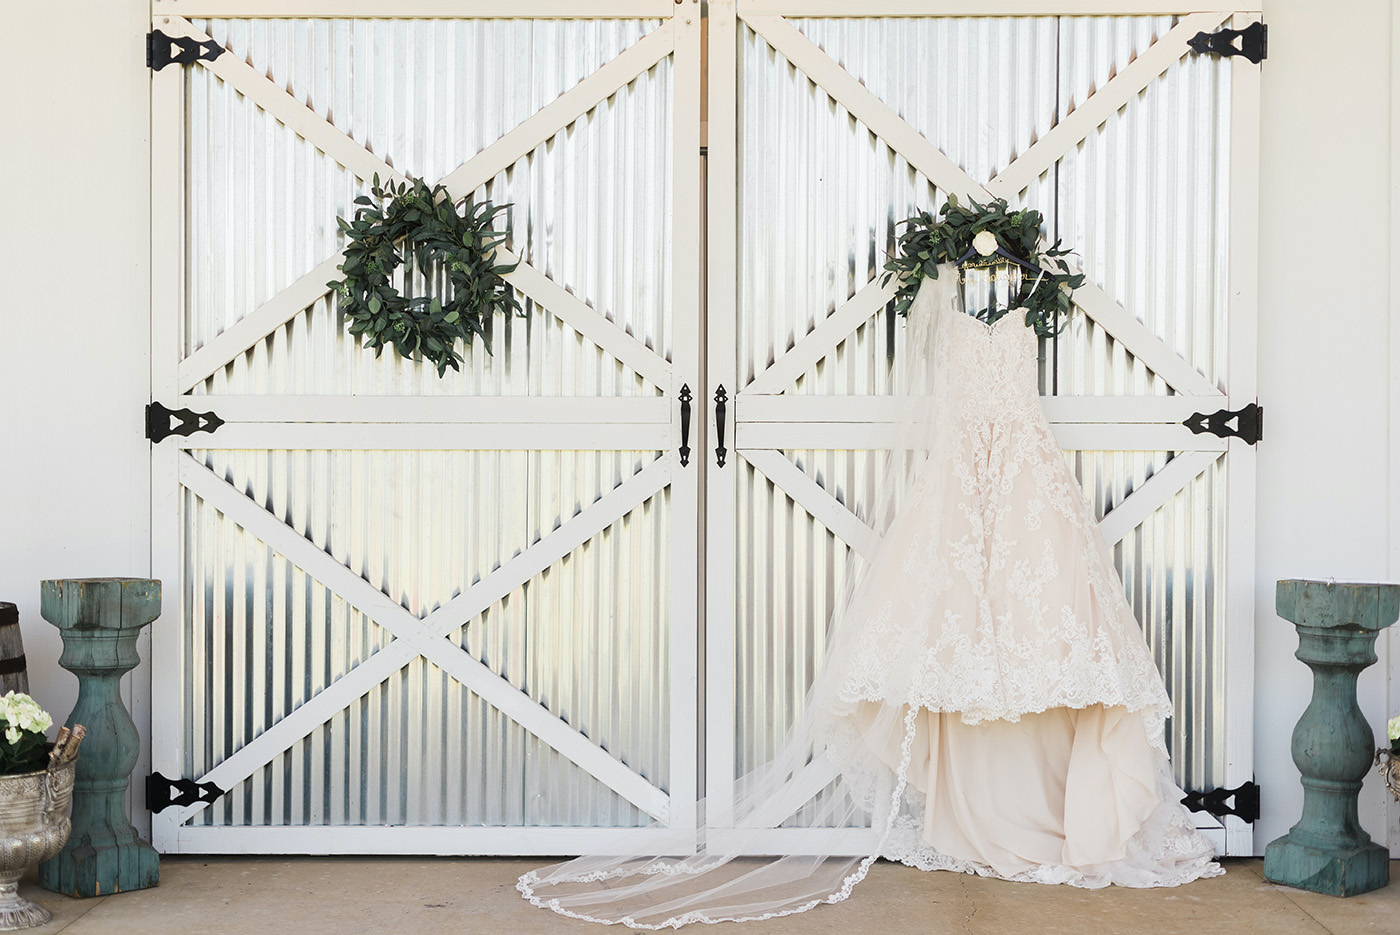 Rustic Inspired Bridal Details, Strapless Lace A A-Line Morilee Wedding Dress Hanging from Steel Barn Door | Florida Wedding Planner and Designer John Campbell Weddings